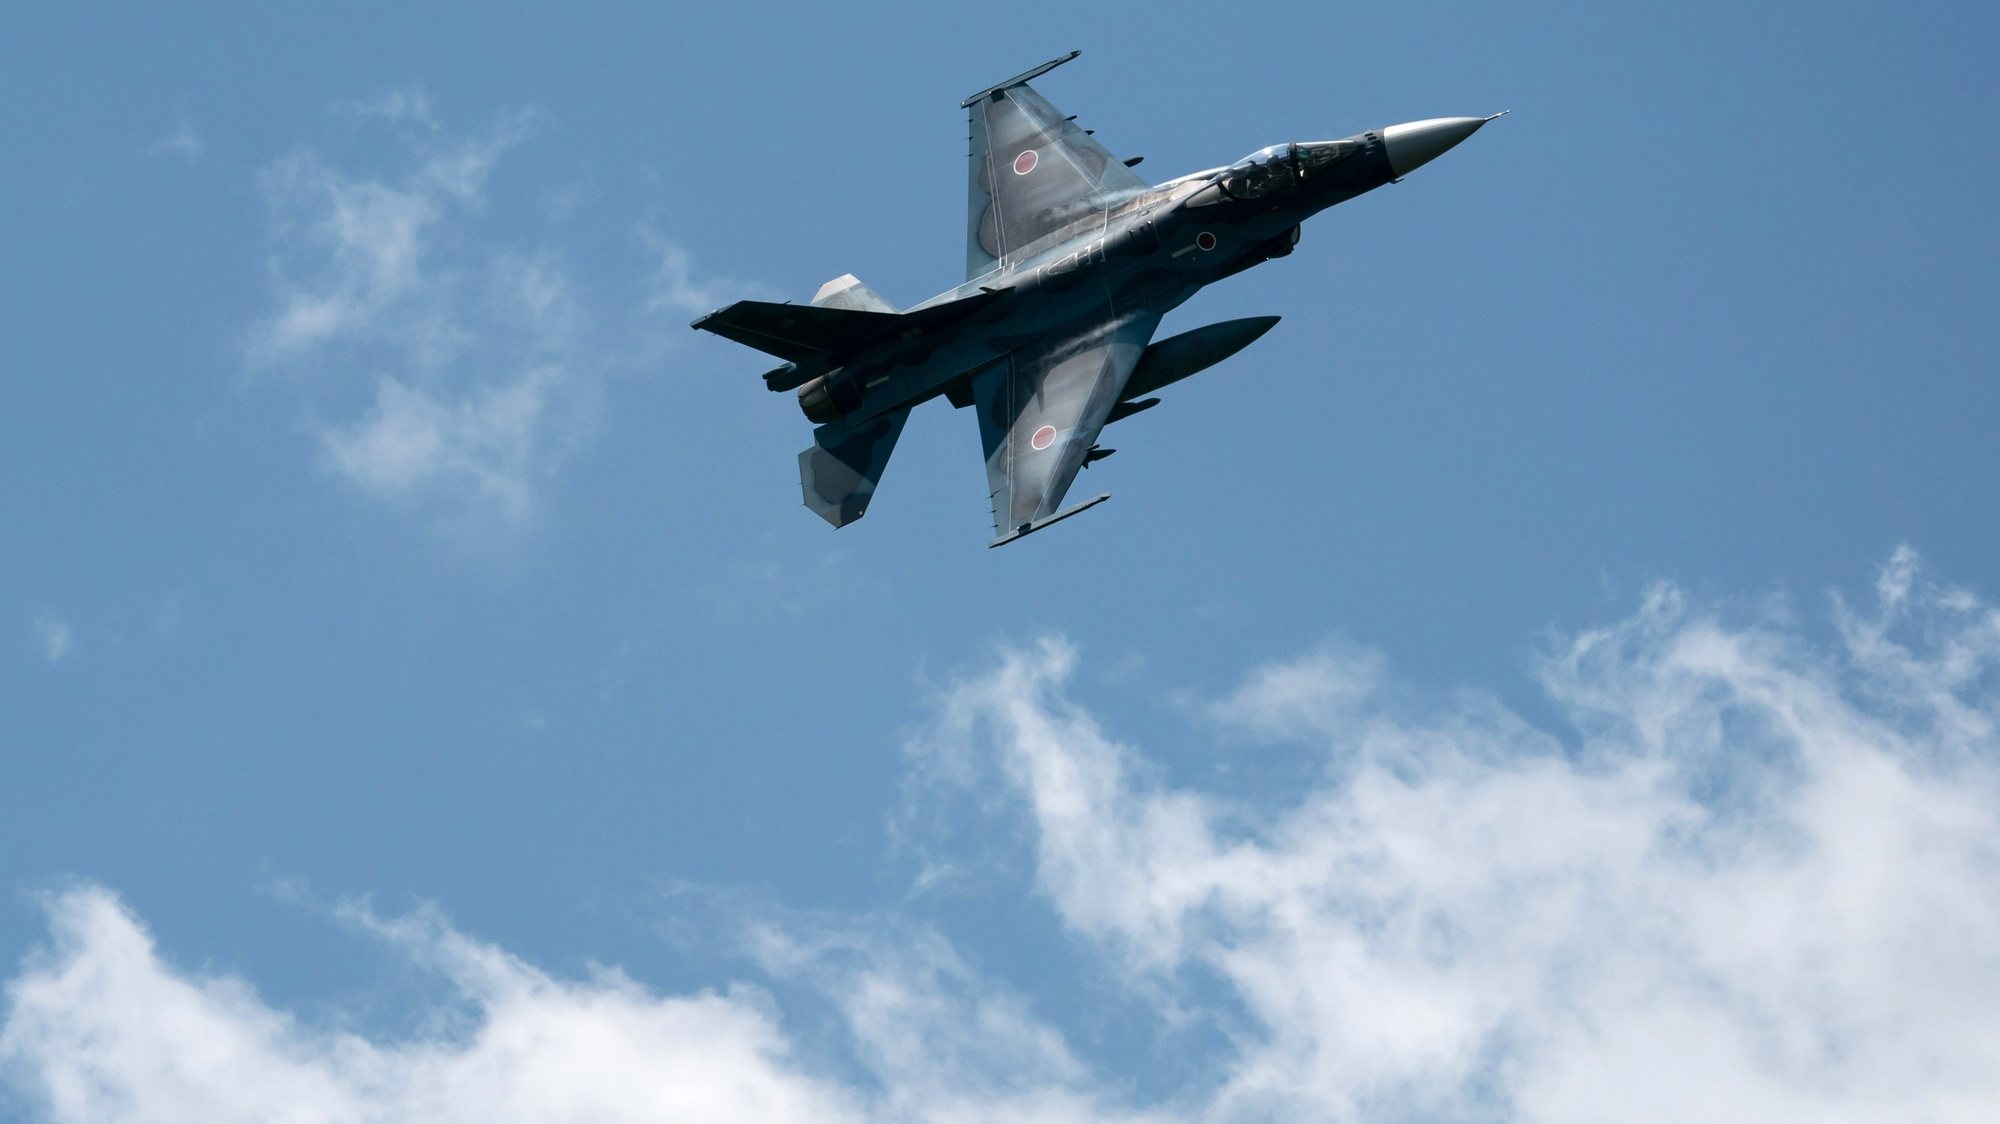 epa09981402 An F-22 fighter jet flies during a live fire exercise conducted by the Japan Ground Self-Defense Force (JGSDF) at East Fuji Maneuver Area in Gotemba, Shizuoka, Japan, 28 May 2022. The annual live-fire drill takes place as Japanese Prime Minister Fumio Kishida pledged to boost defense spending after a summit with U.S. President Joe Biden and other &#039;Quad&#039; leaders this week.  EPA/Tomohiro Ohsumi / POOL